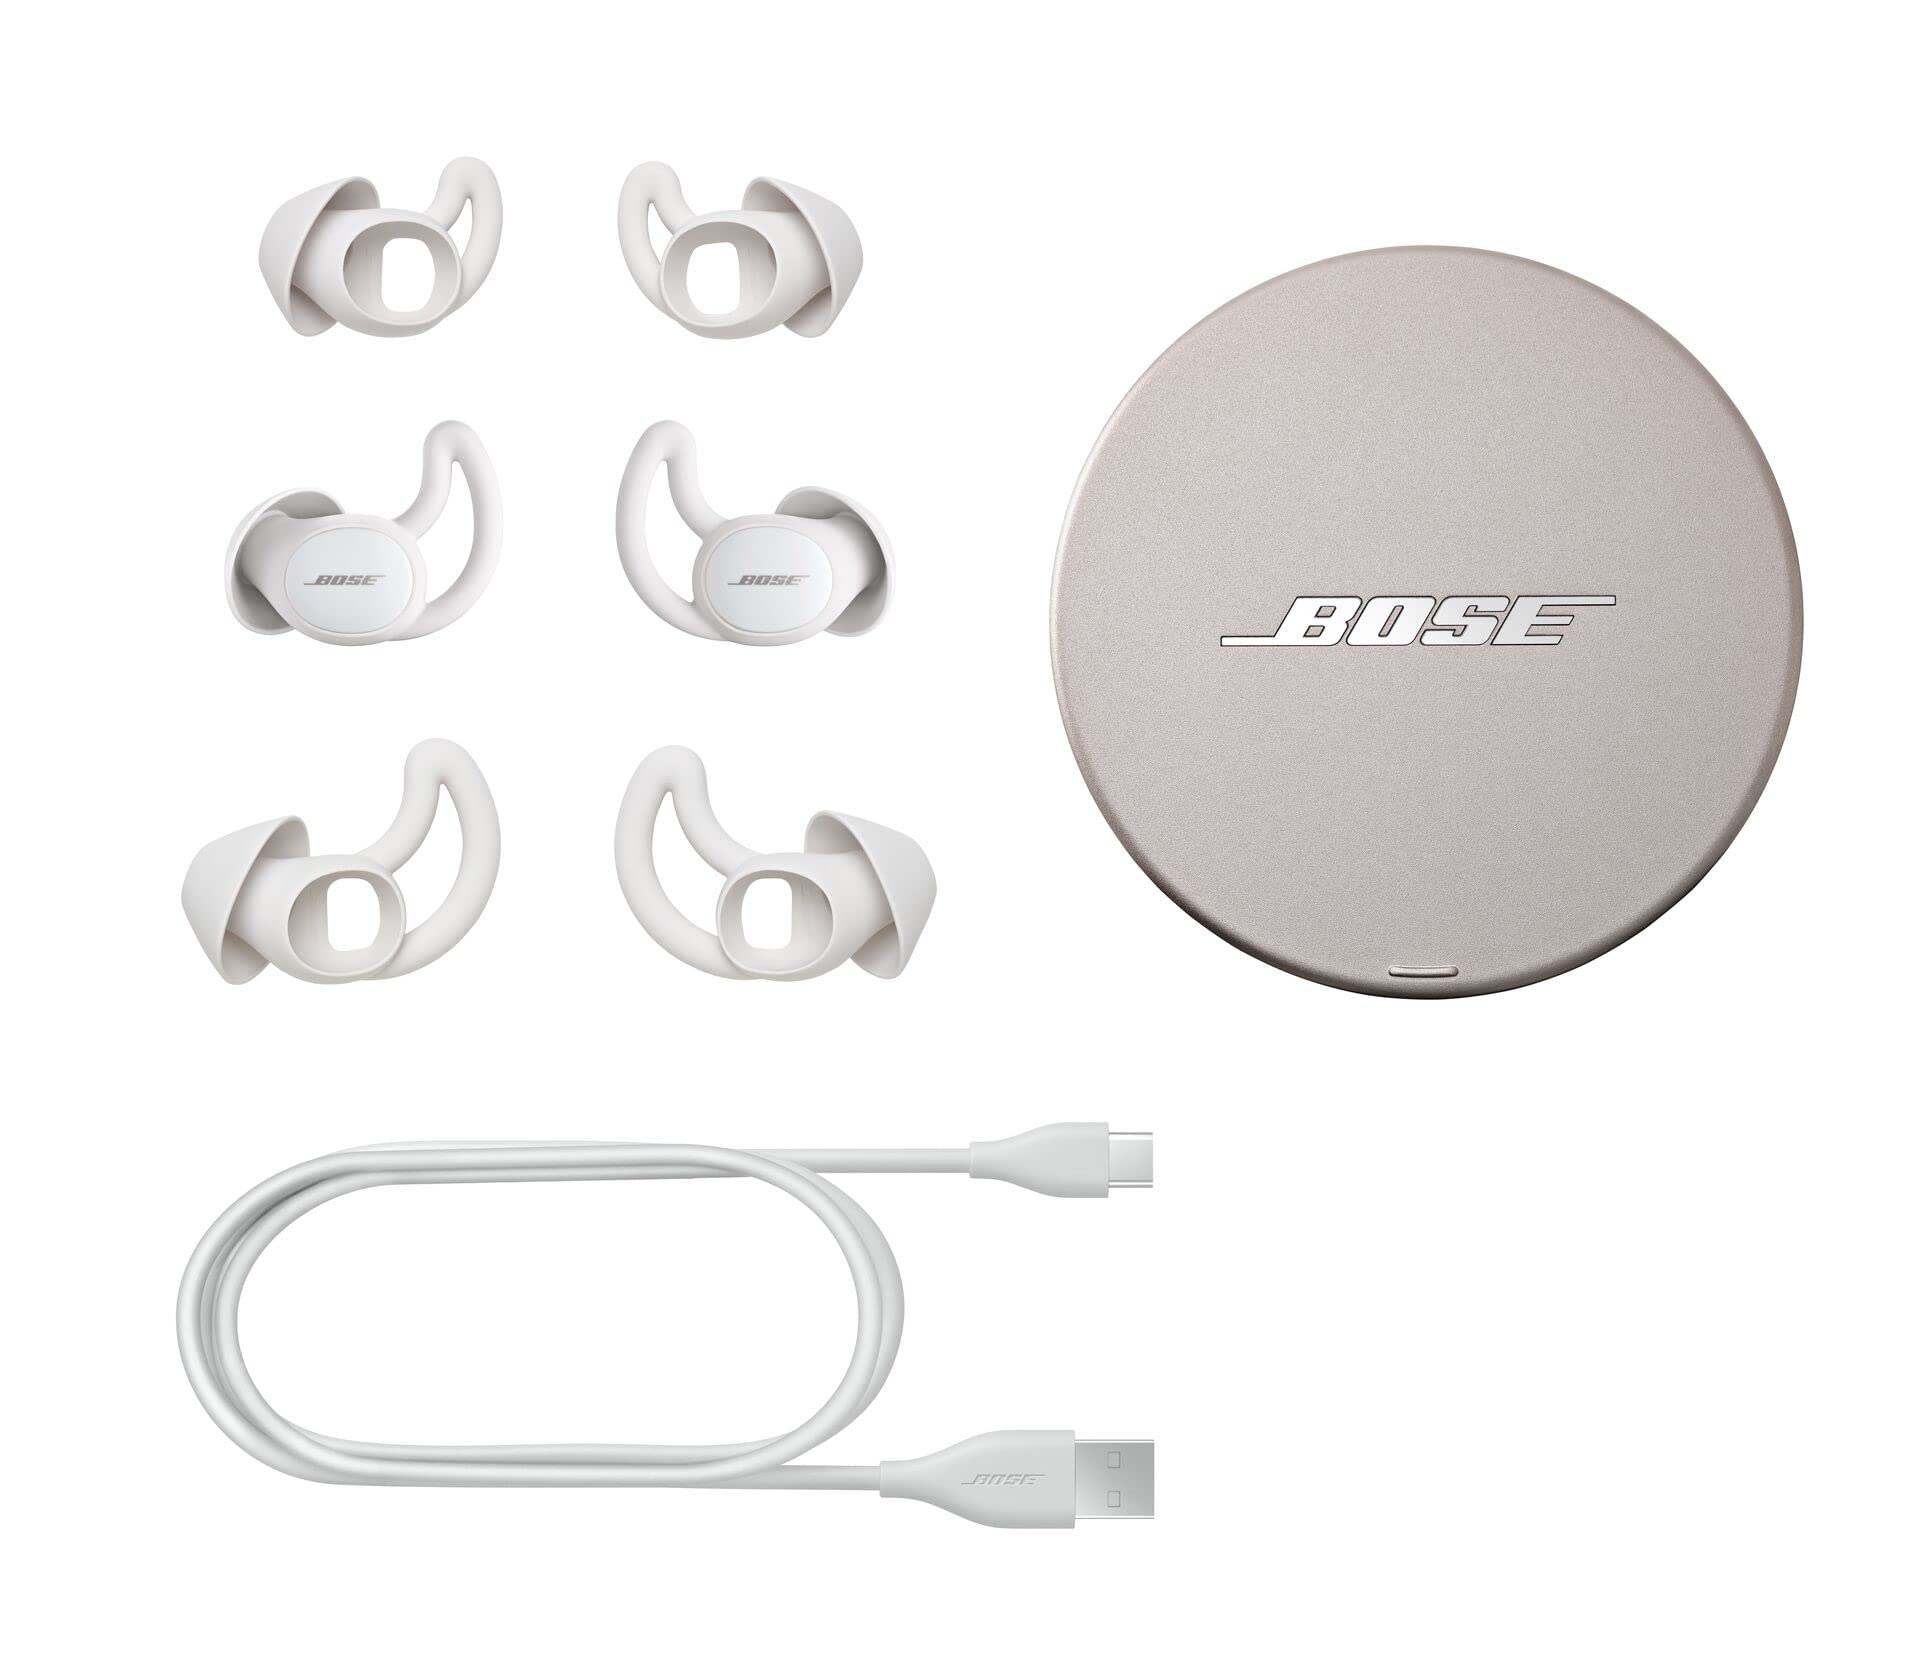 Bose Sleepbuds II - Sleep Technology Clinically Proven to Help You Fall Asleep Faster, Sleep Better with Relaxing and Soothing Sleep Sounds